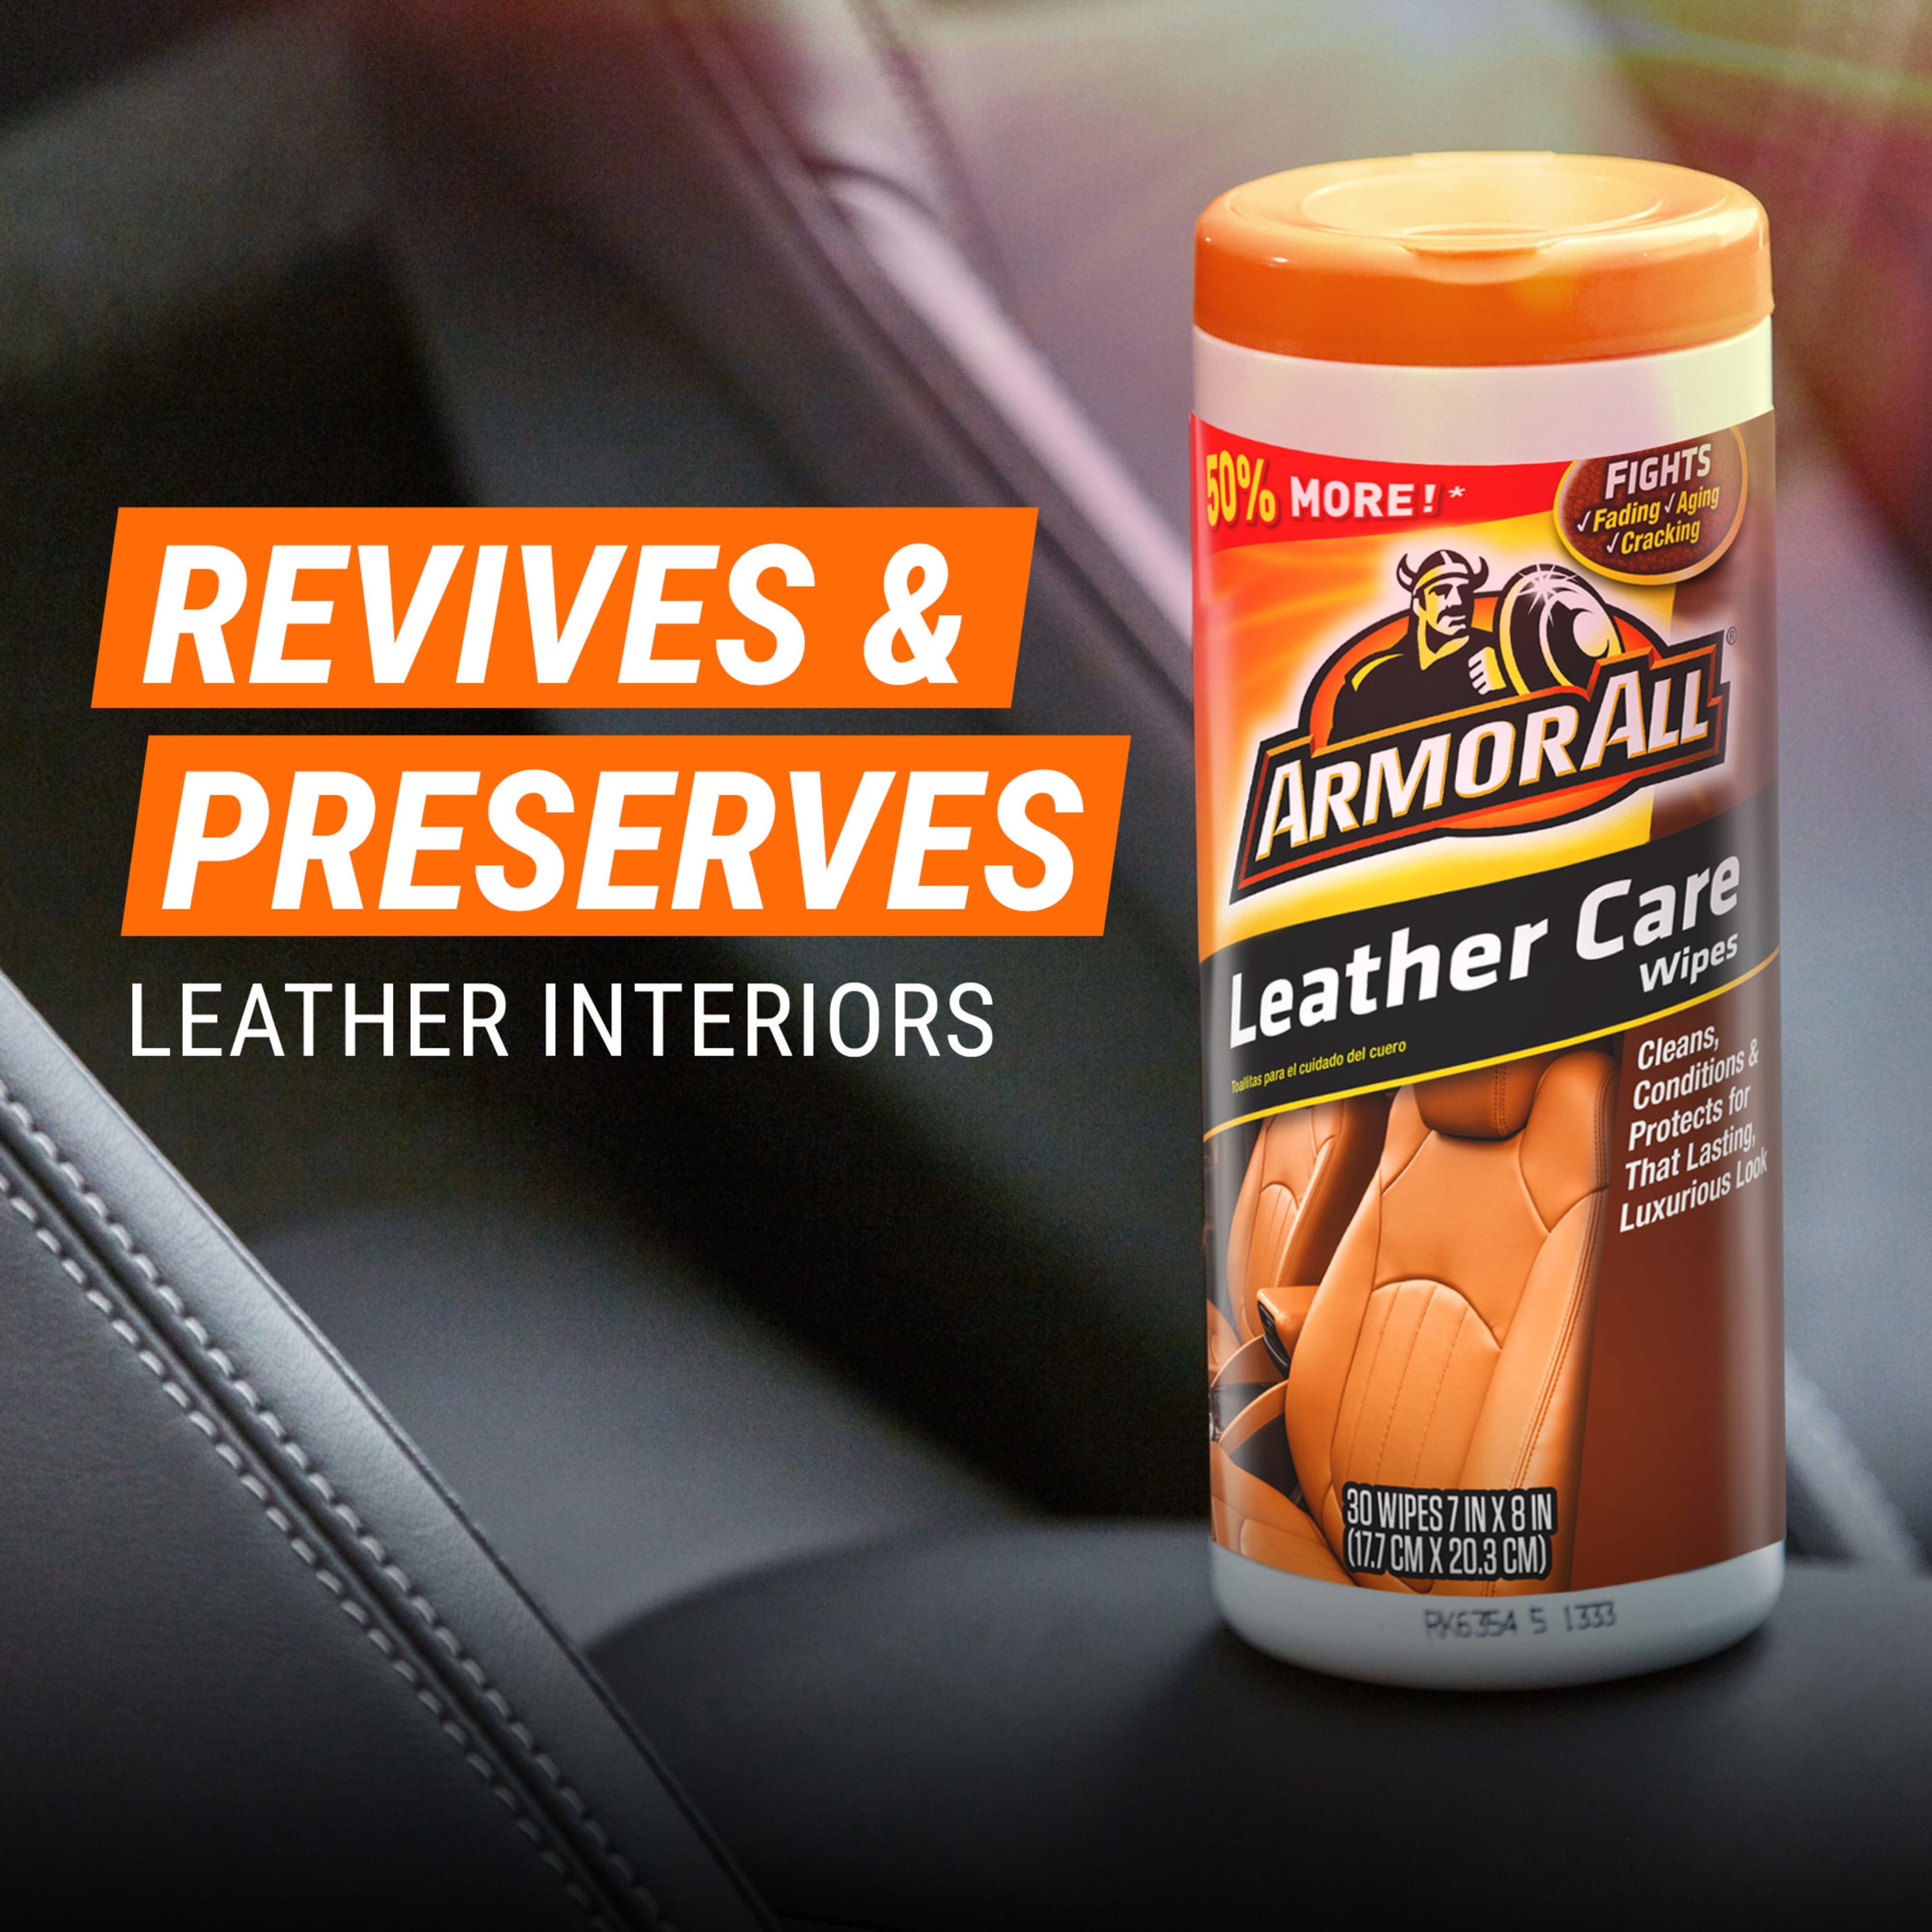 Finished Leather Cleaning Wipes — The Leather Institute